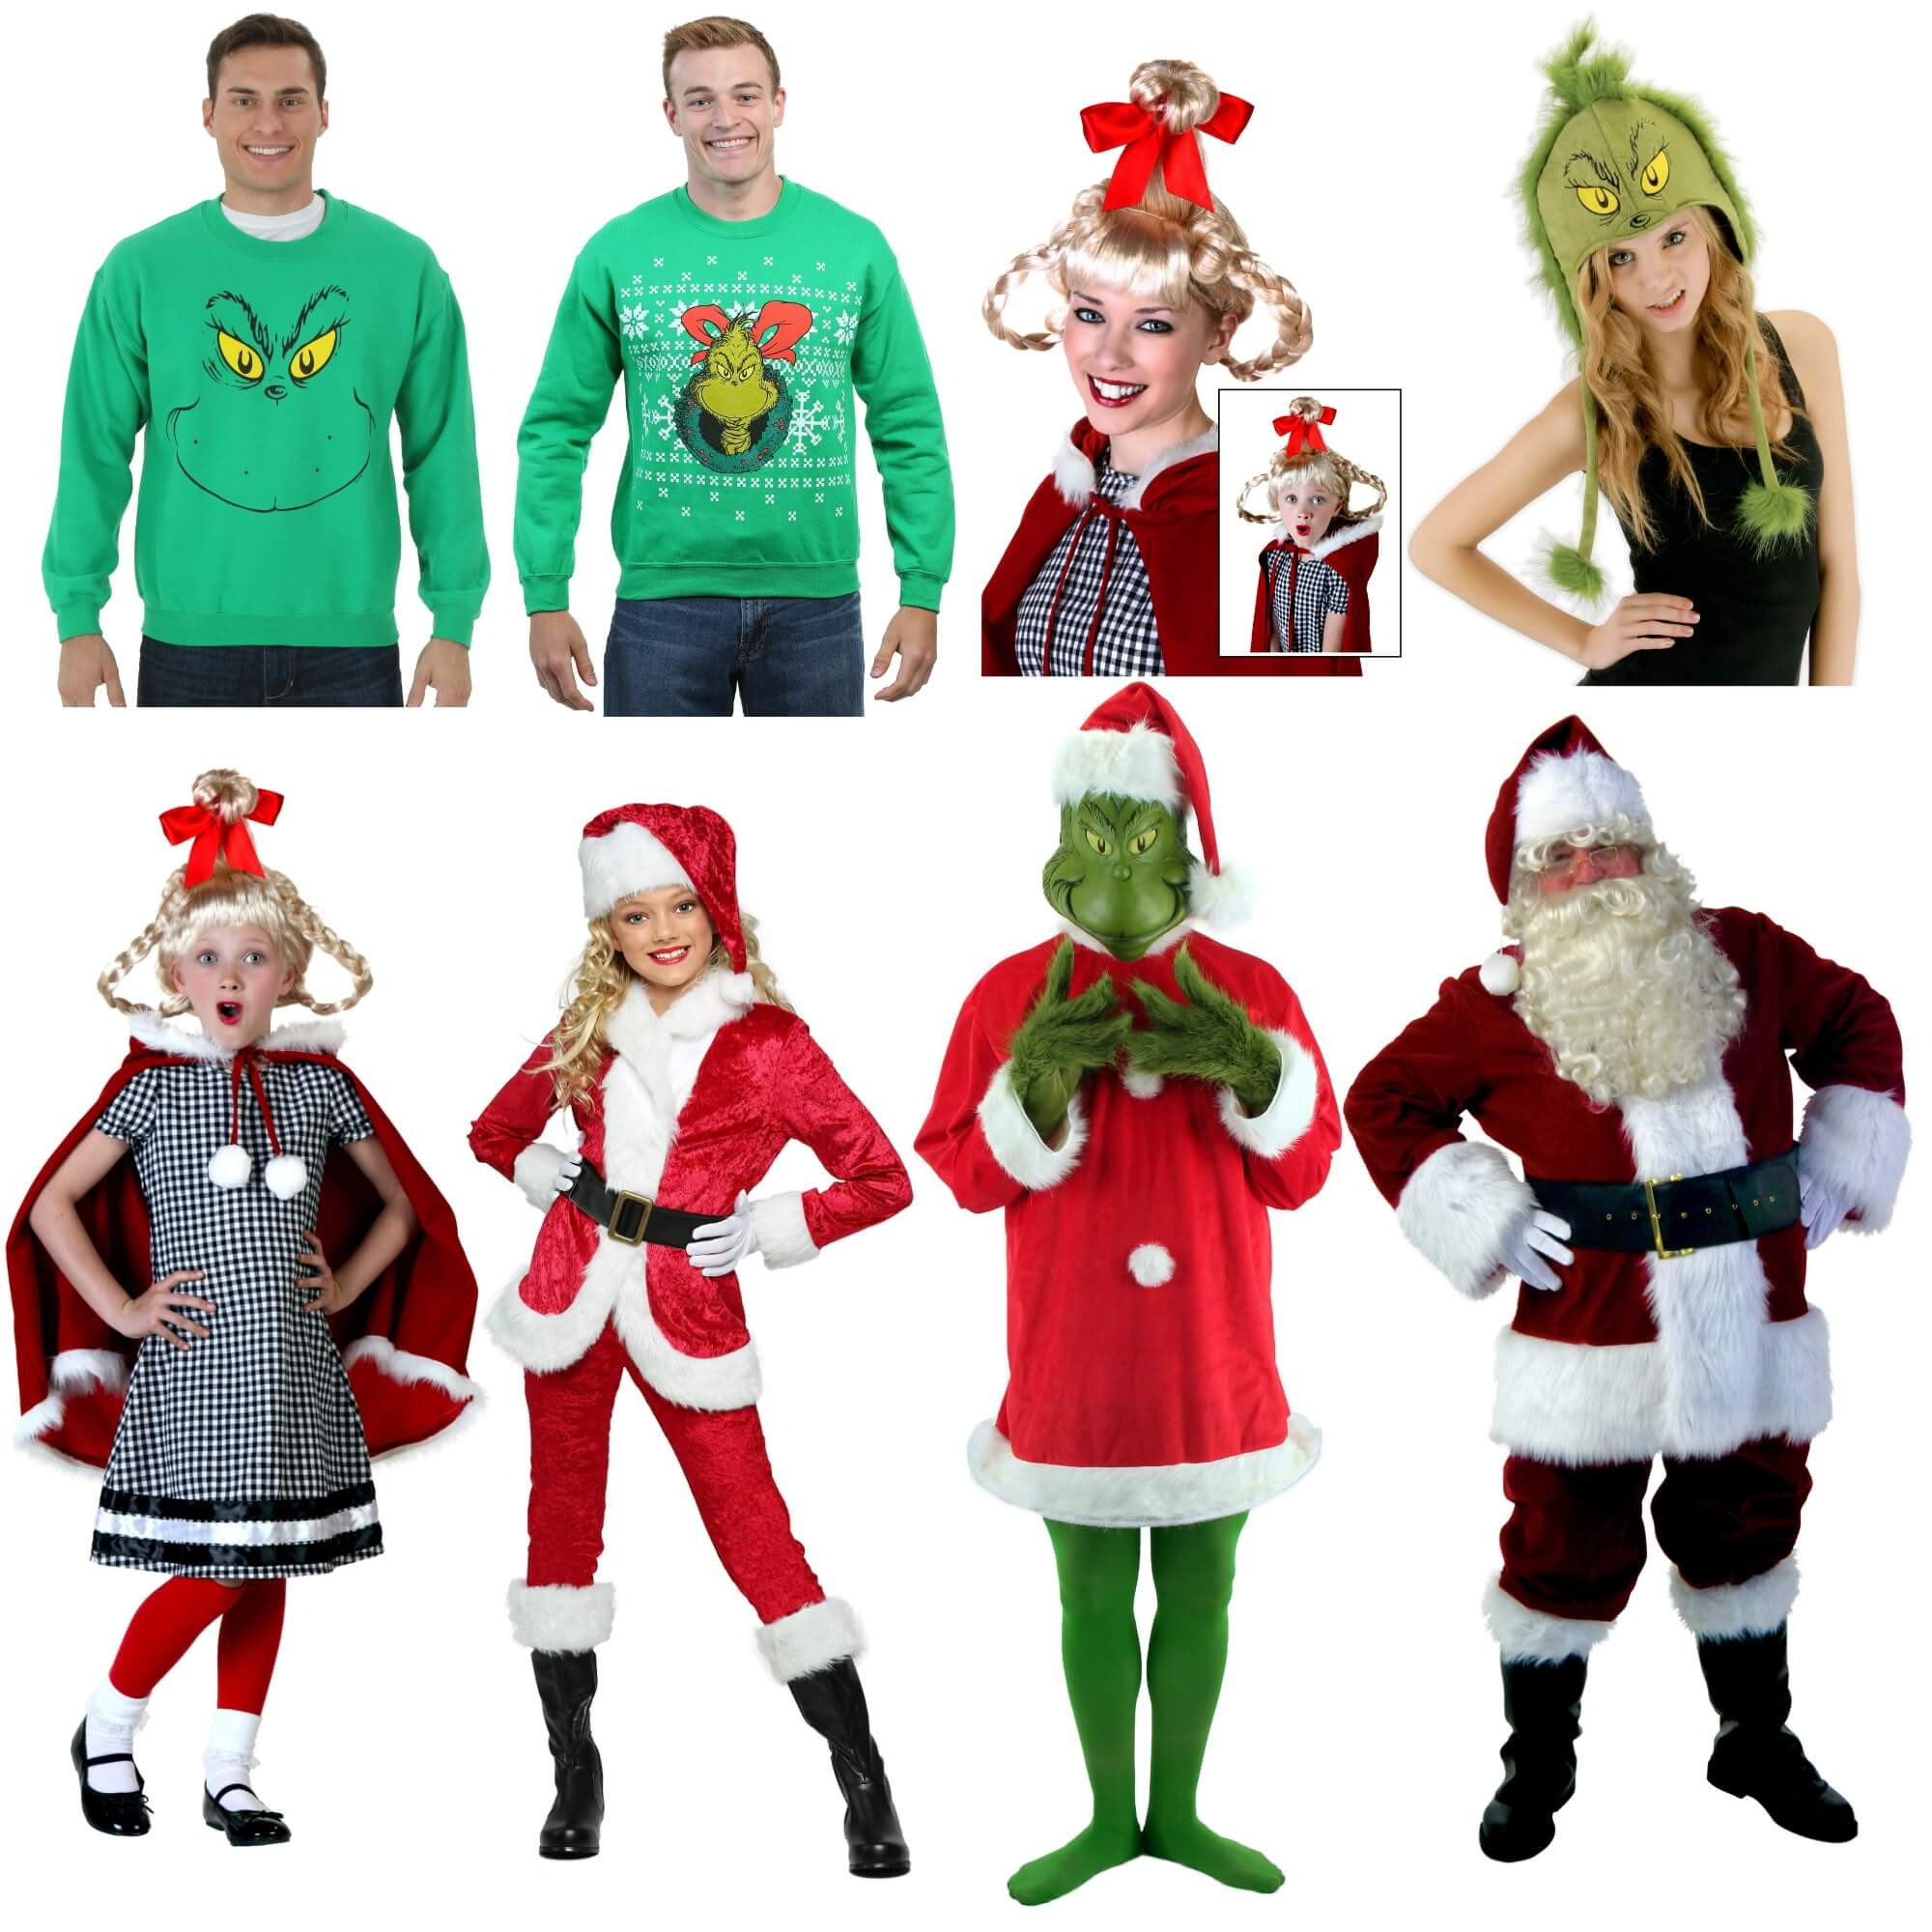 Holiday Themed Party Costume Ideas
 How to Throw a Grinch Costume Party Halloween Costumes Blog